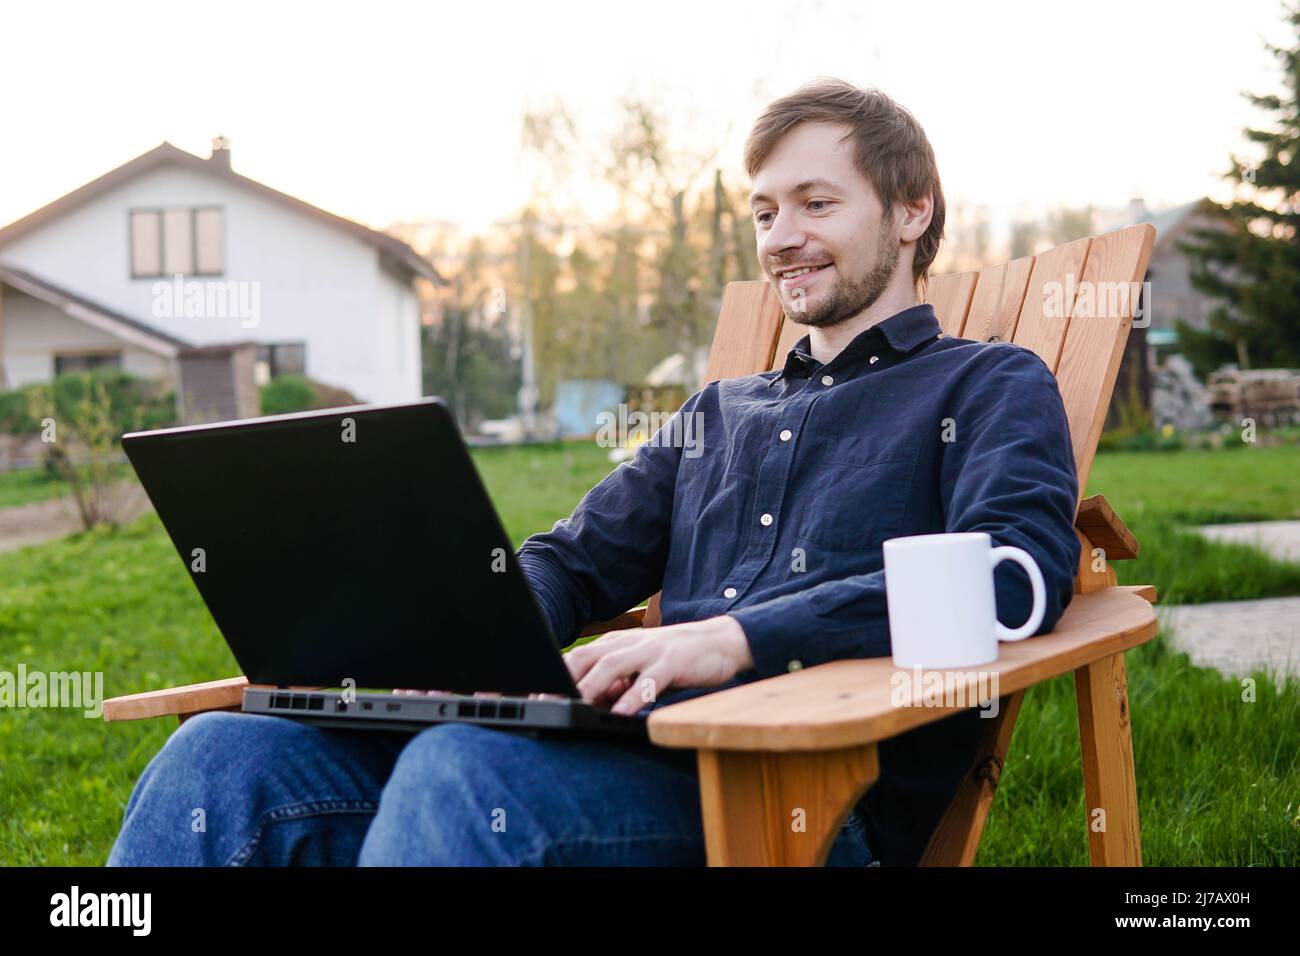 Young man freelancer sitting in wooden chair with laptop working outdoors in garden. Stock Photo